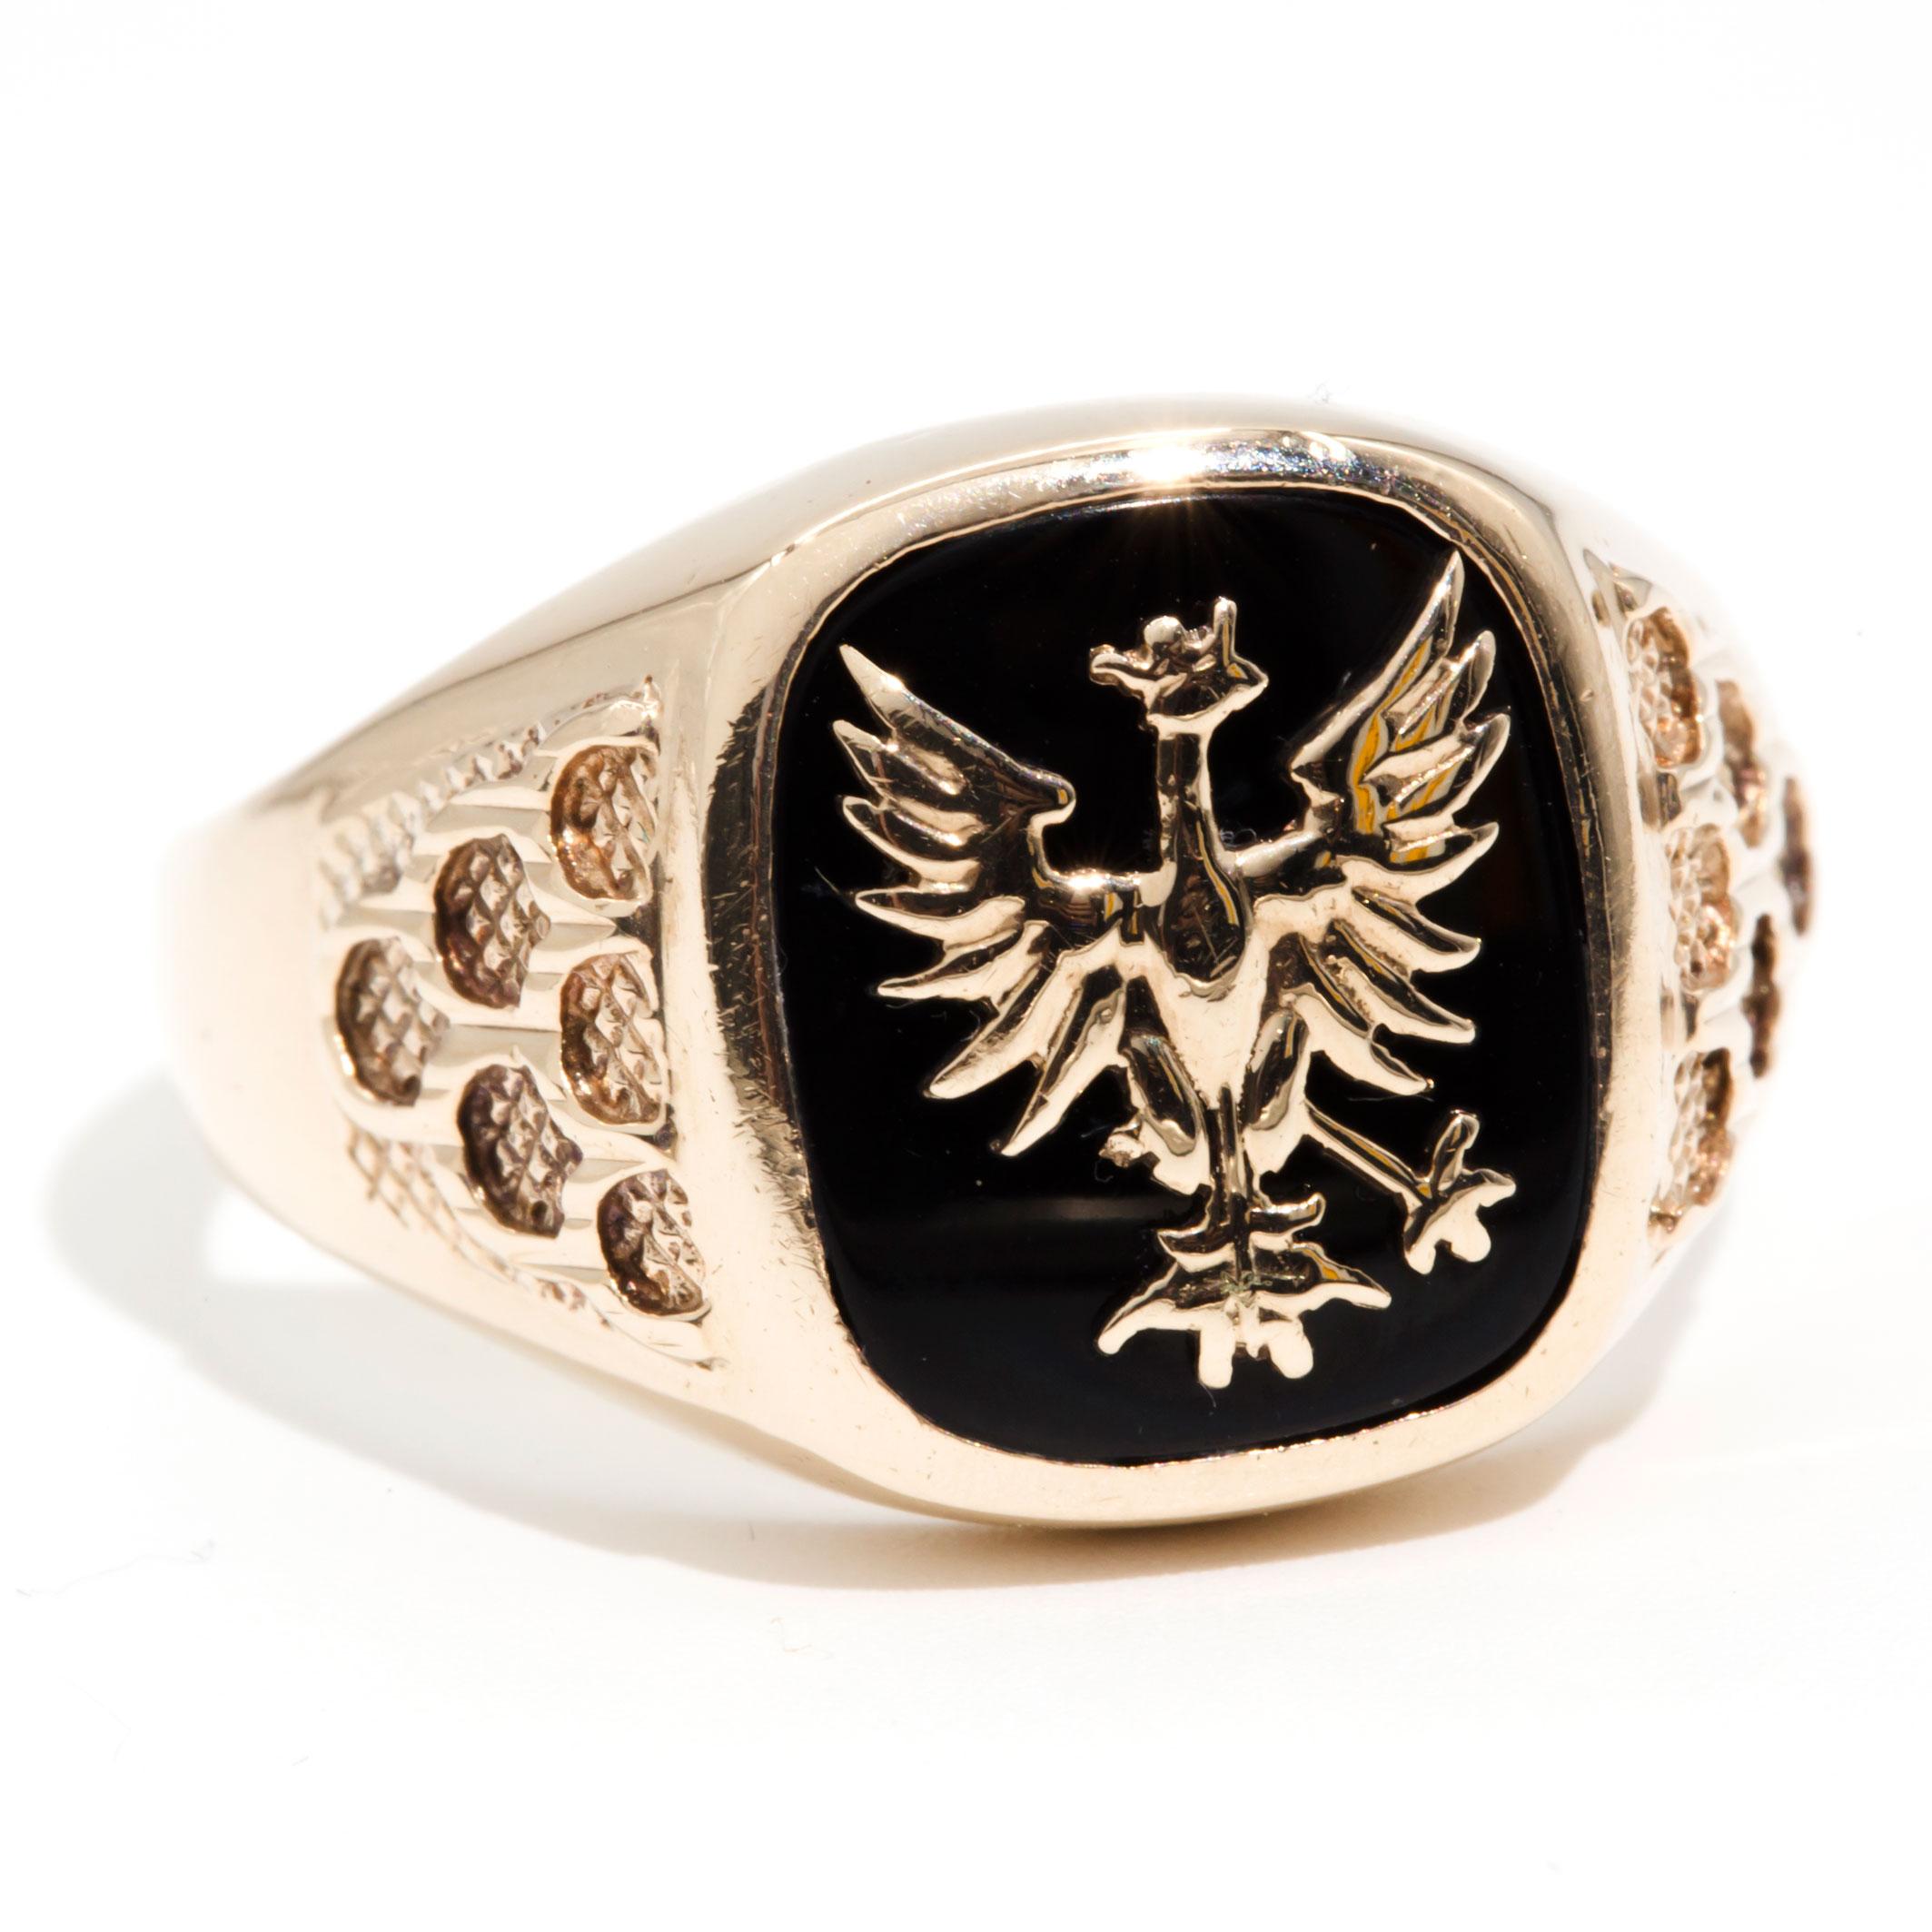 Forged in 9 carat yellow gold, this handsome vintage mens signet ring featuring a cushion shape flat dome top with a black onyx and a unique gold Pheonix feature on top. We have named this dapper piece The Andy Ring. The Andy Ring has a high